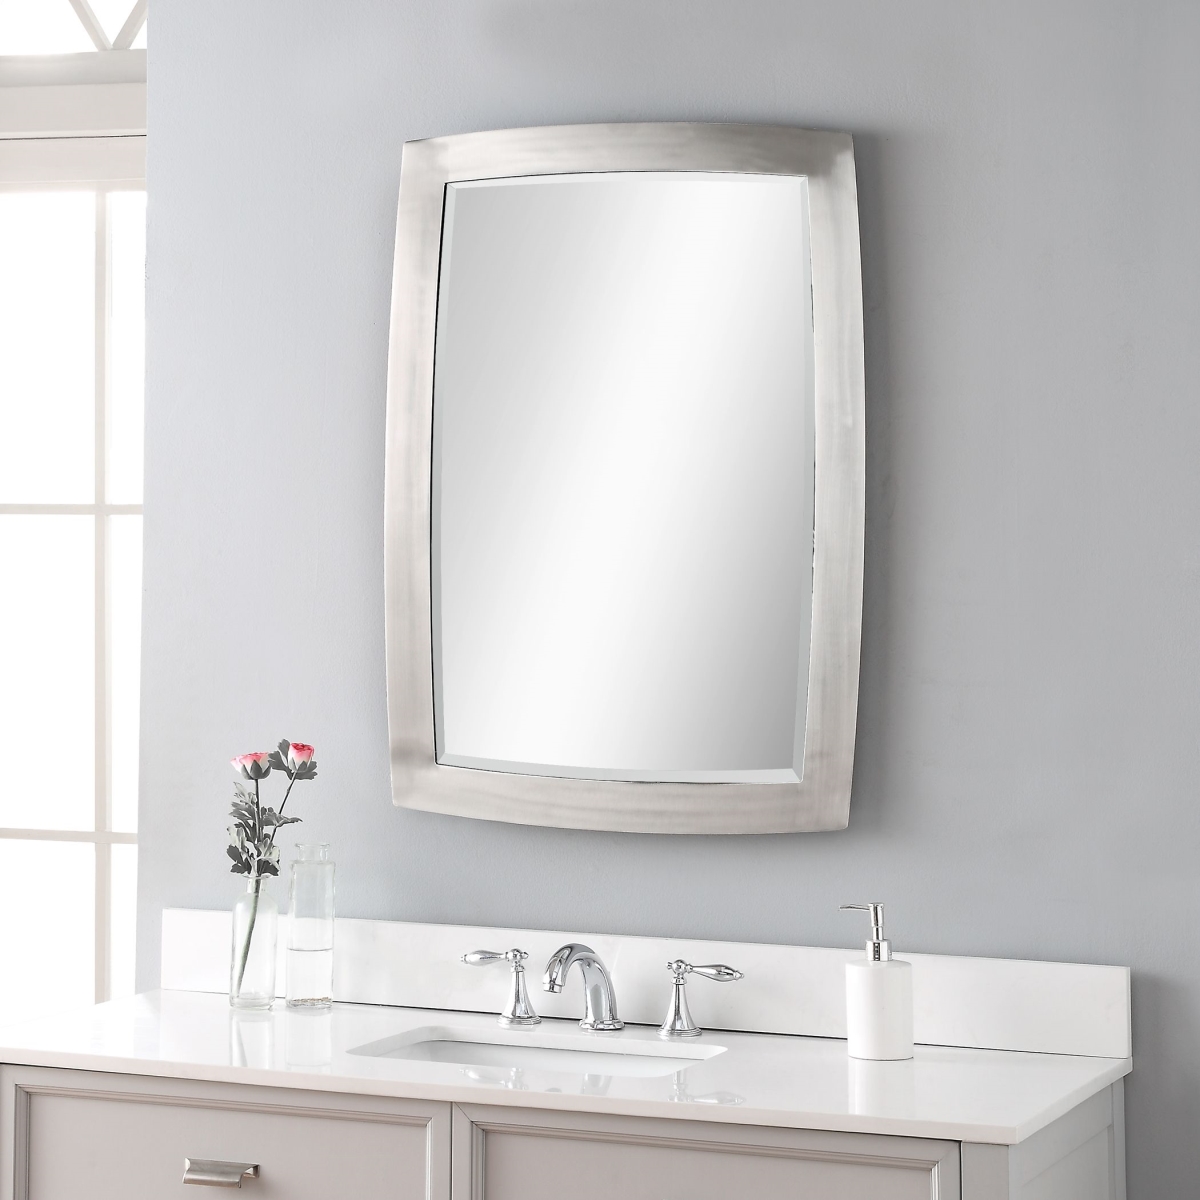 Picture of 212 Main 09618 28.5 x 38.5 x 4 in. Haskill Mirror  Brushed Nickel